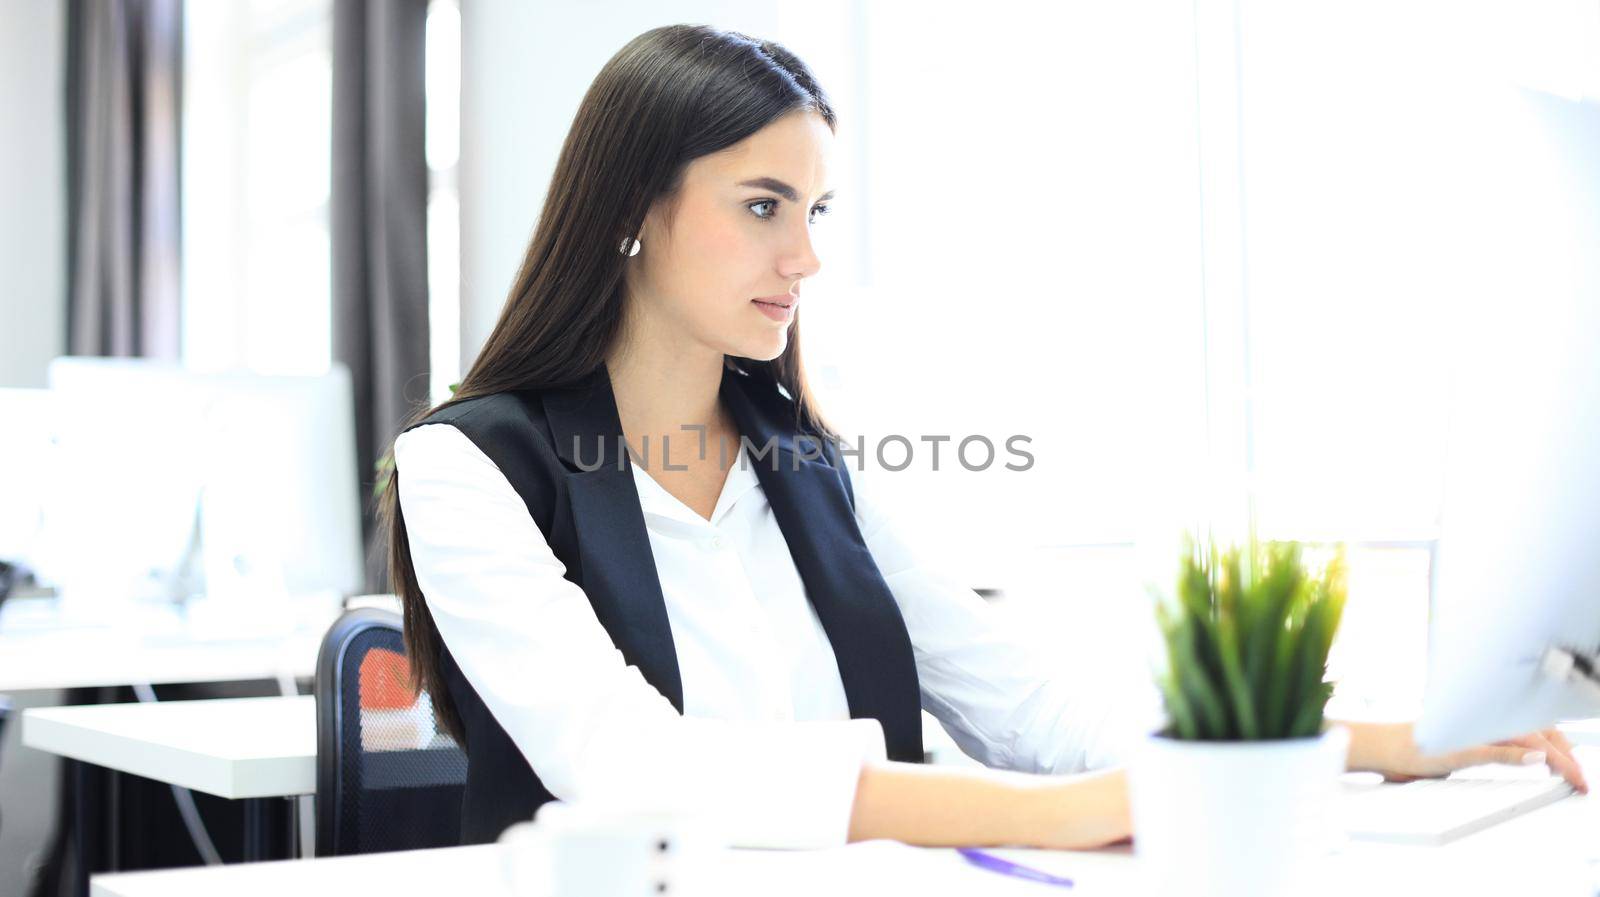 Modern business woman in the office with copy space